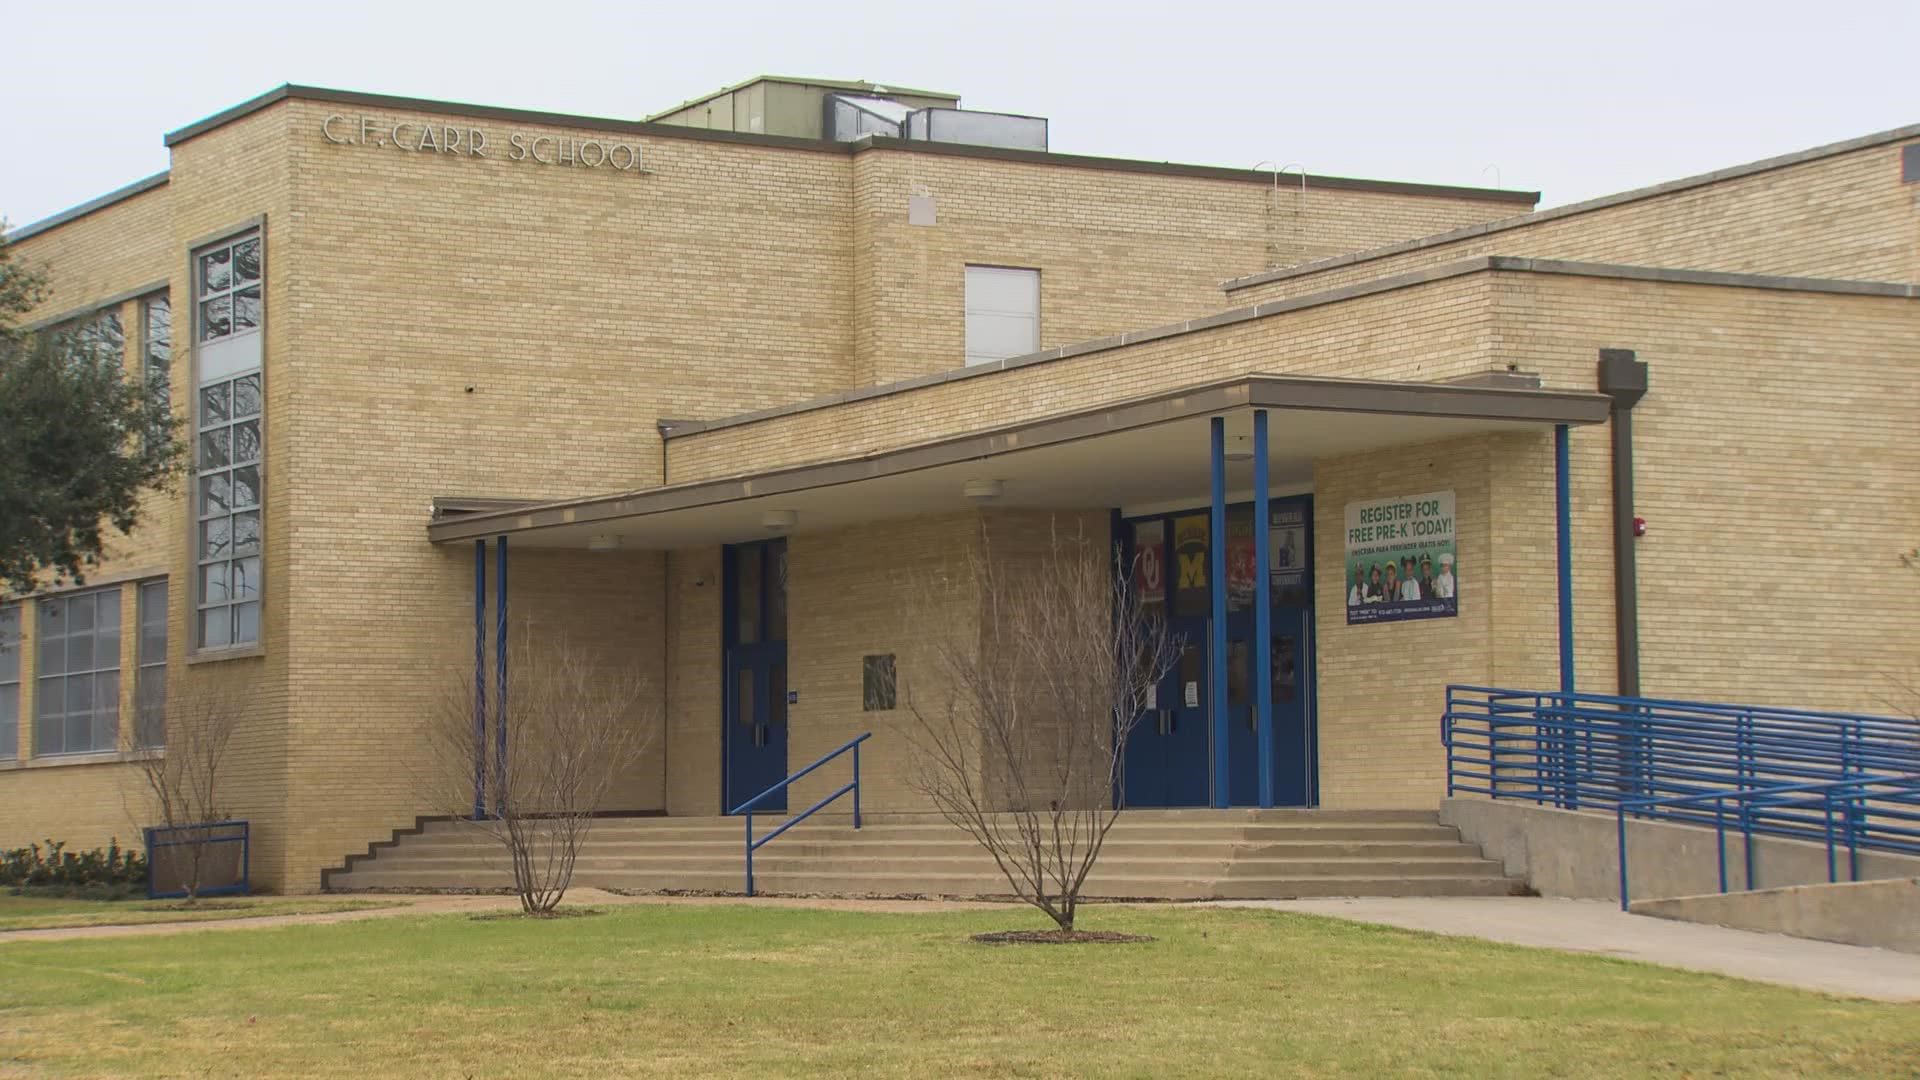 Dallas ISD's C.F. Carr Elementary will receive $16M in renovations and resources, as part of funding approved in 2020 bond initiative.